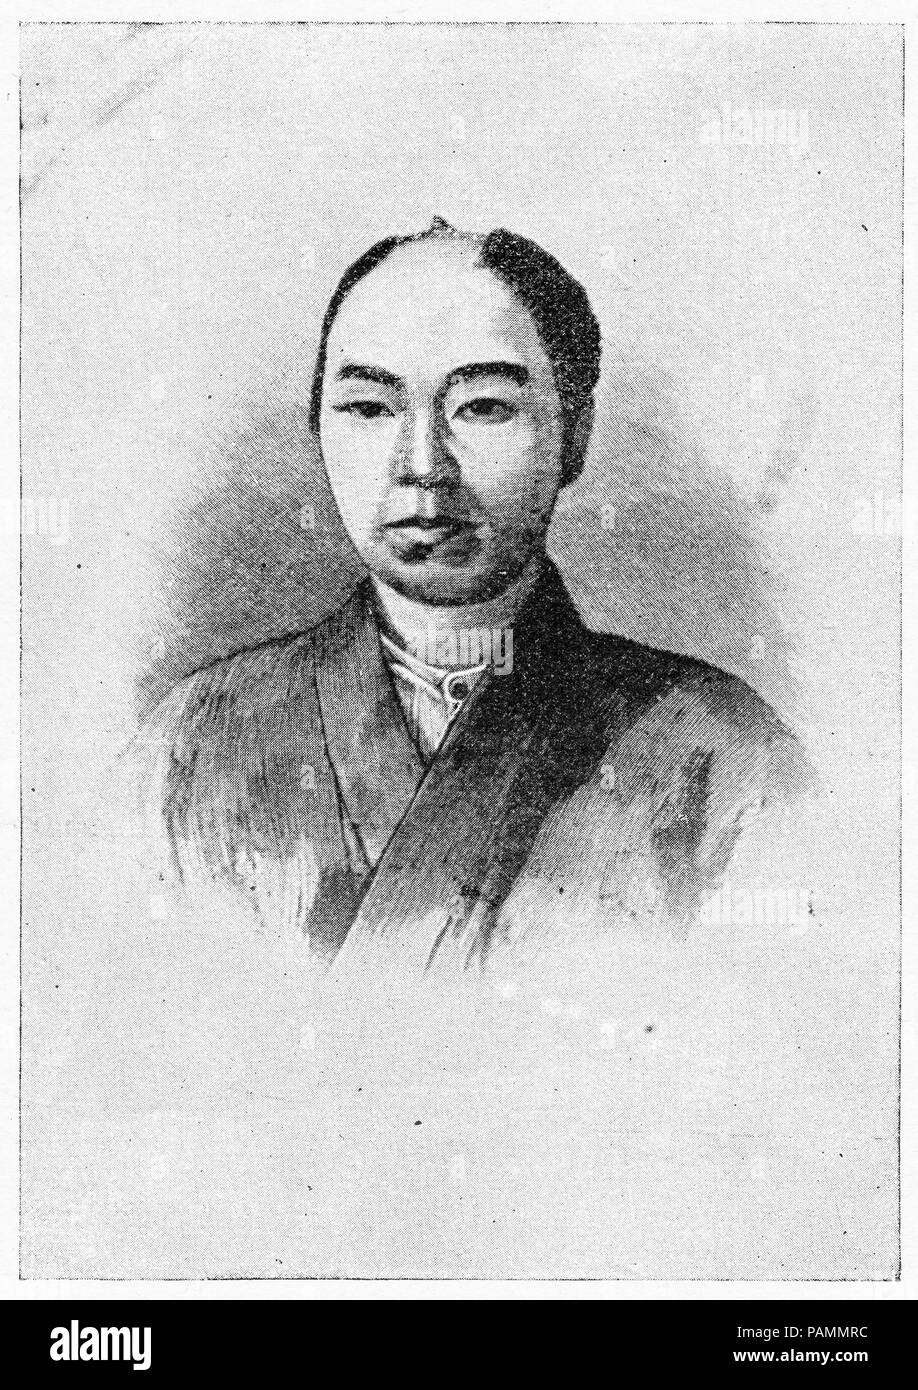 Engraving of the Japanese preacher Neesima Simata. From Young England, An Illustrated Monthly for Boys, 1903. Stock Photo